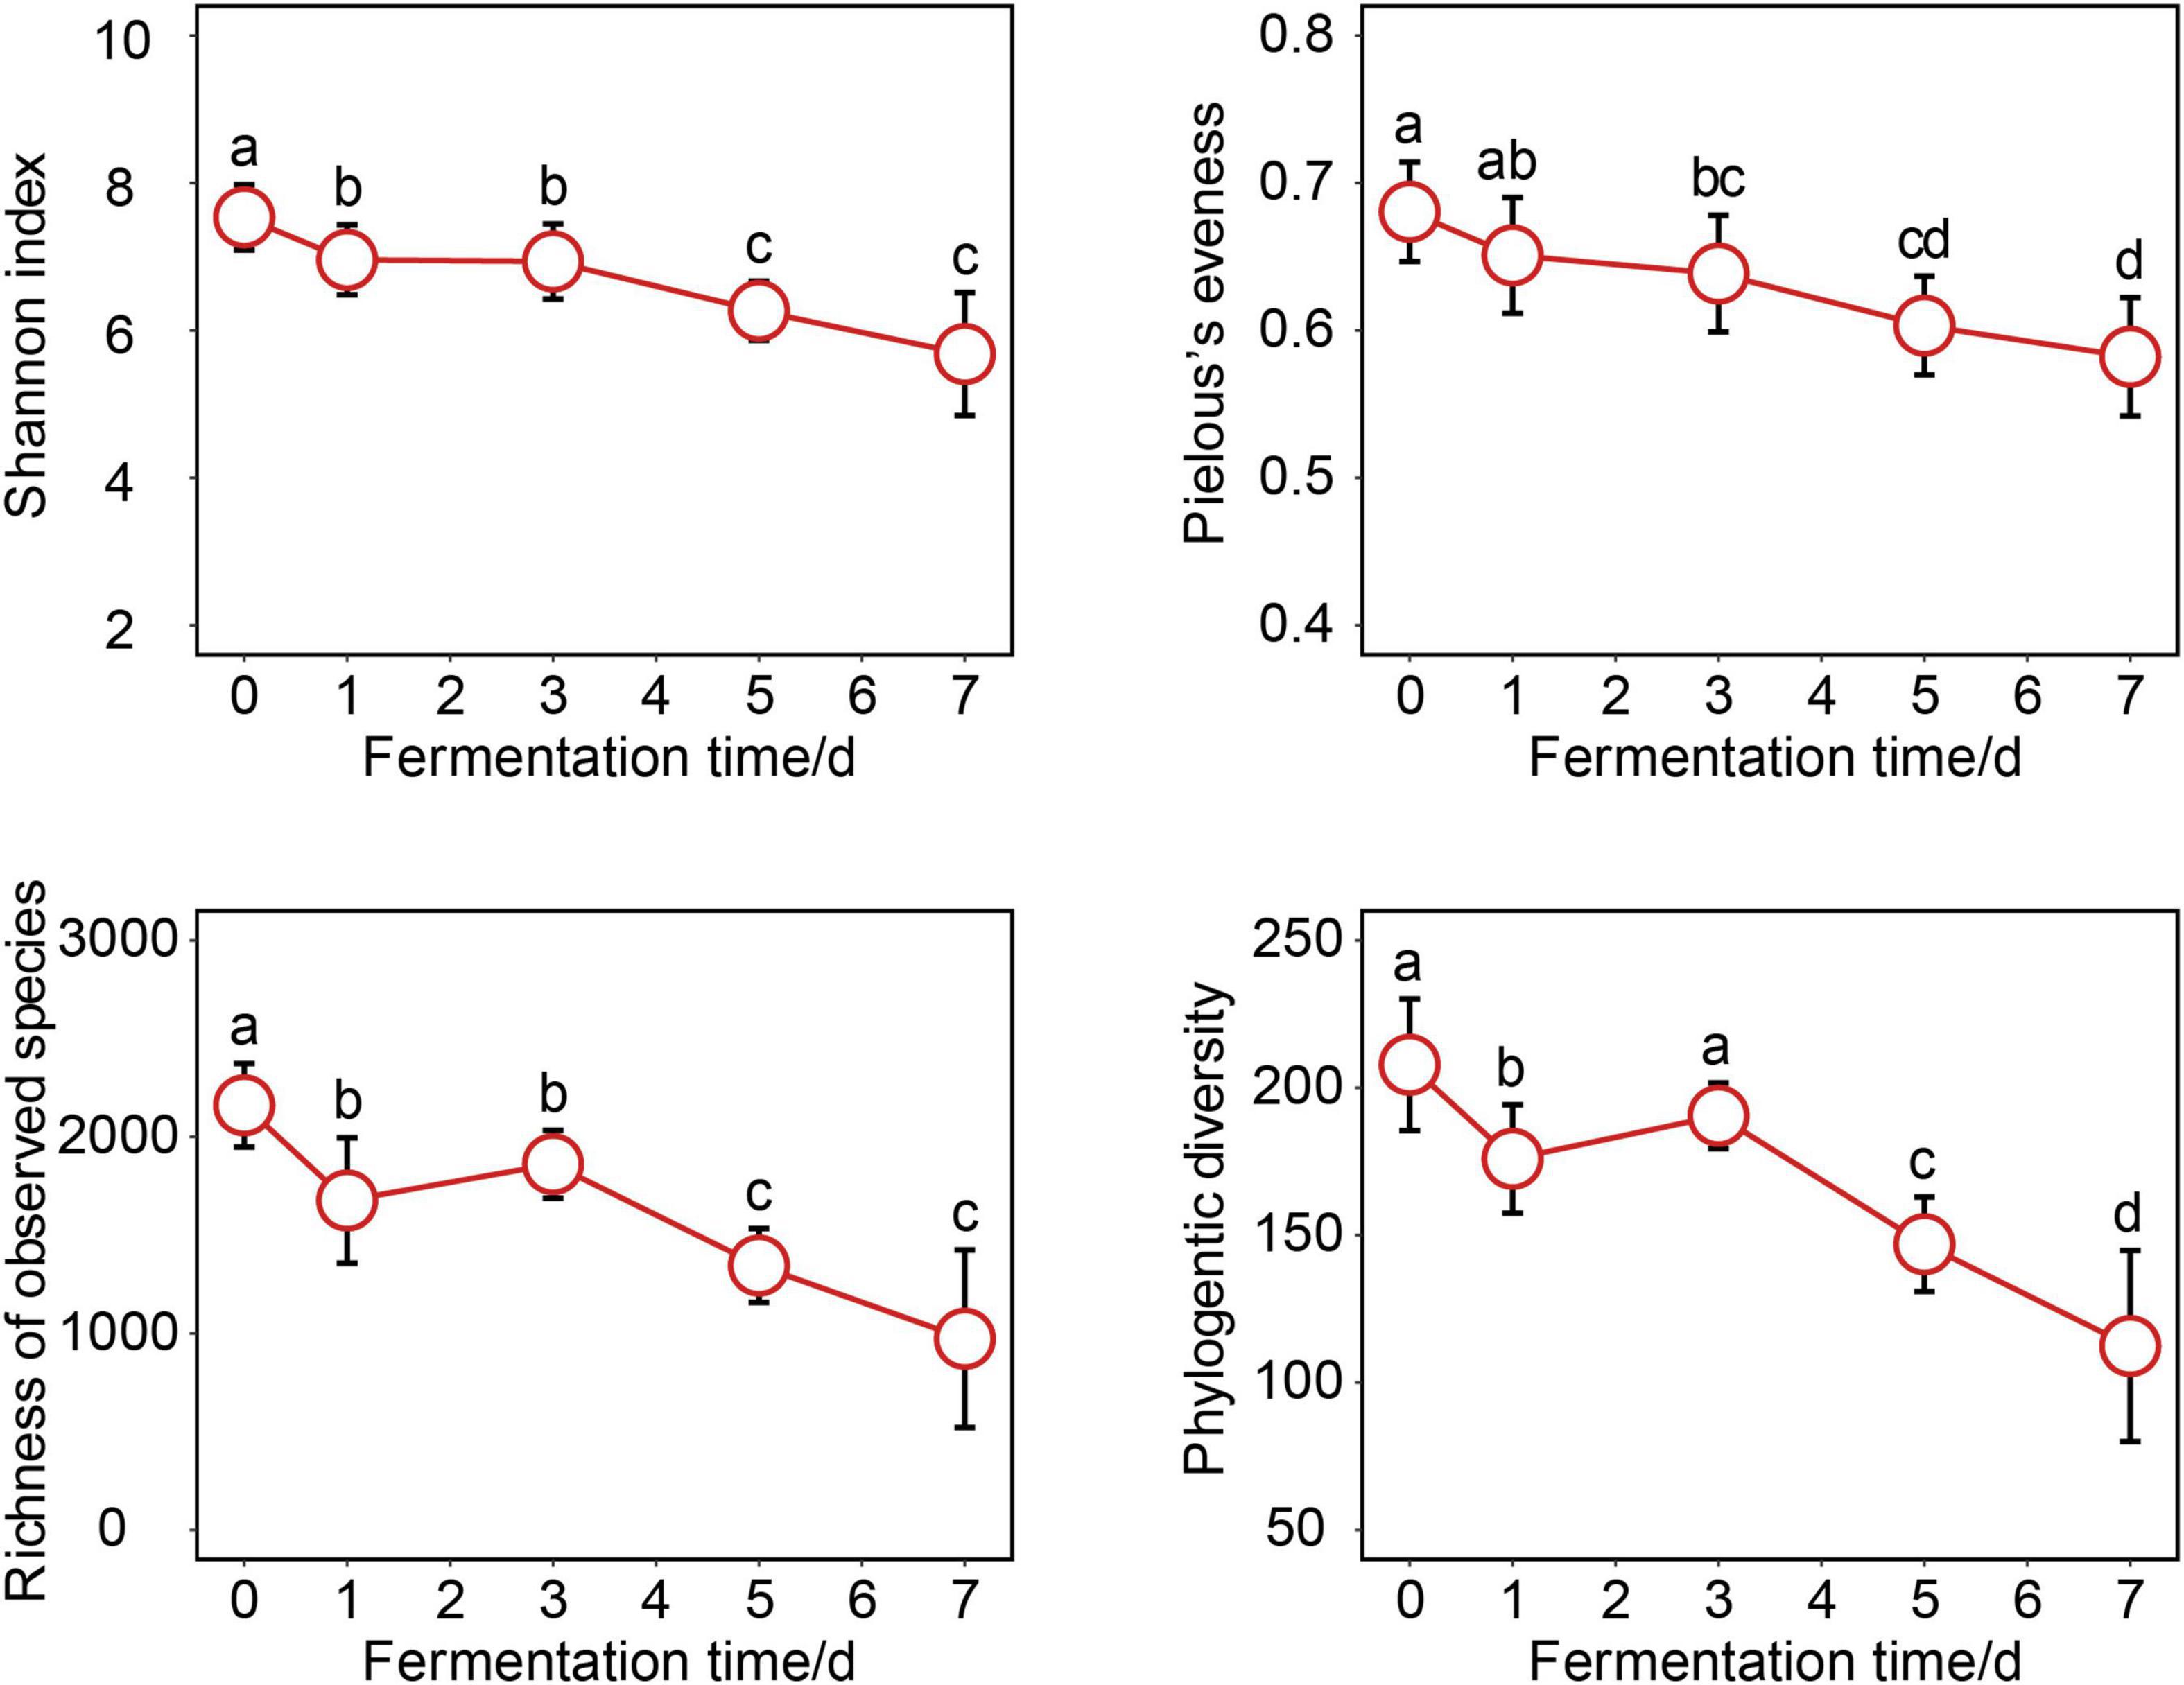 Rise and metabolic roles of Vibrio during the fermentation of crab paste